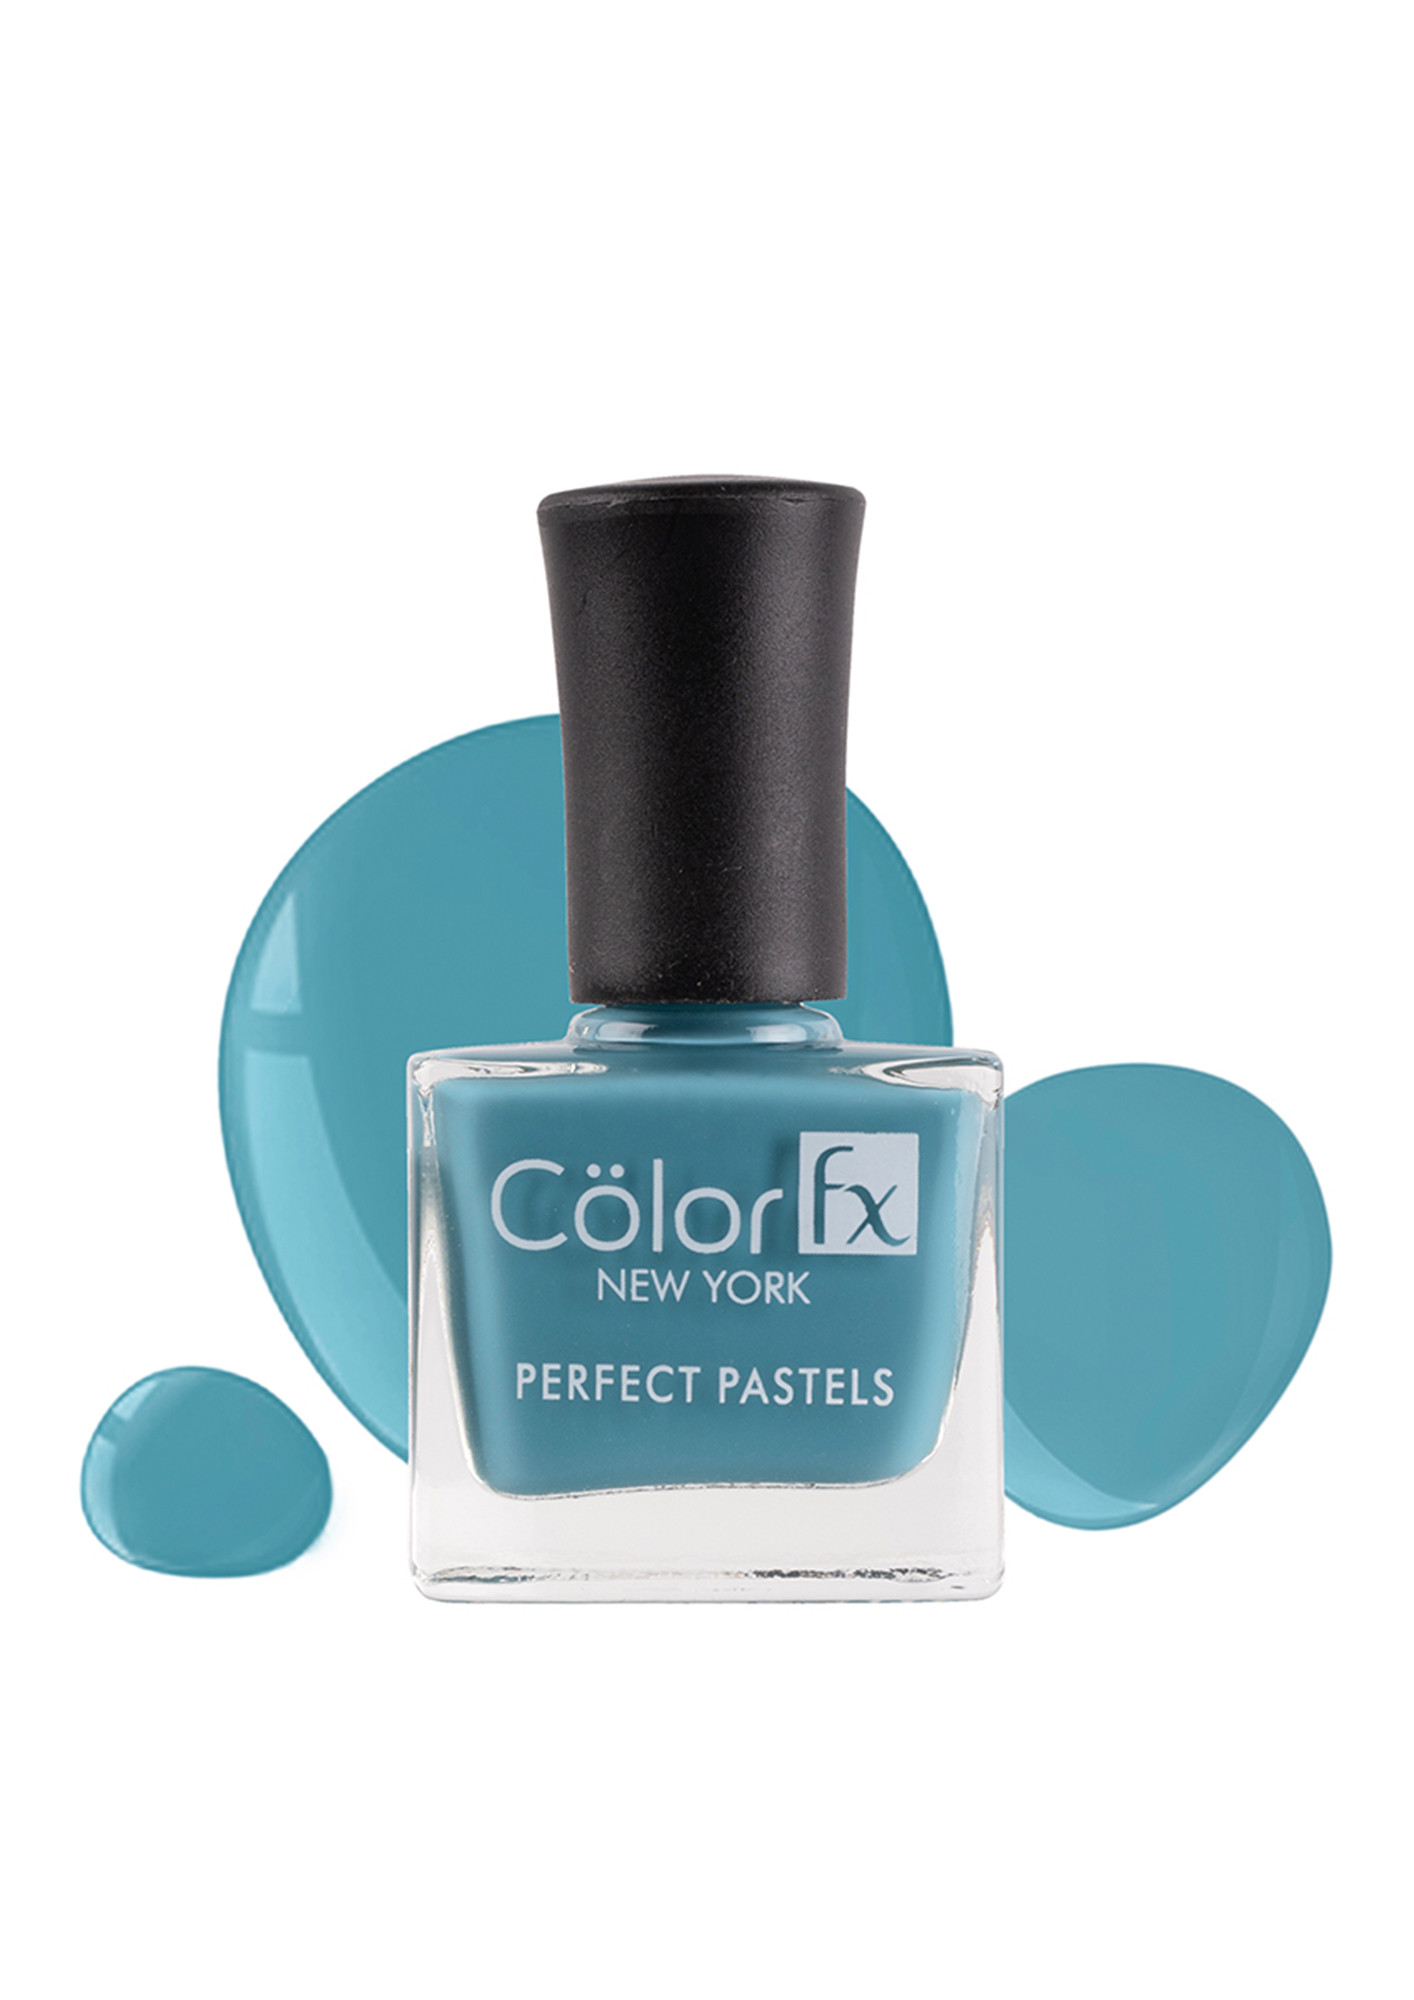 Pastel Nail Polishes For All Skin Tones - Features -